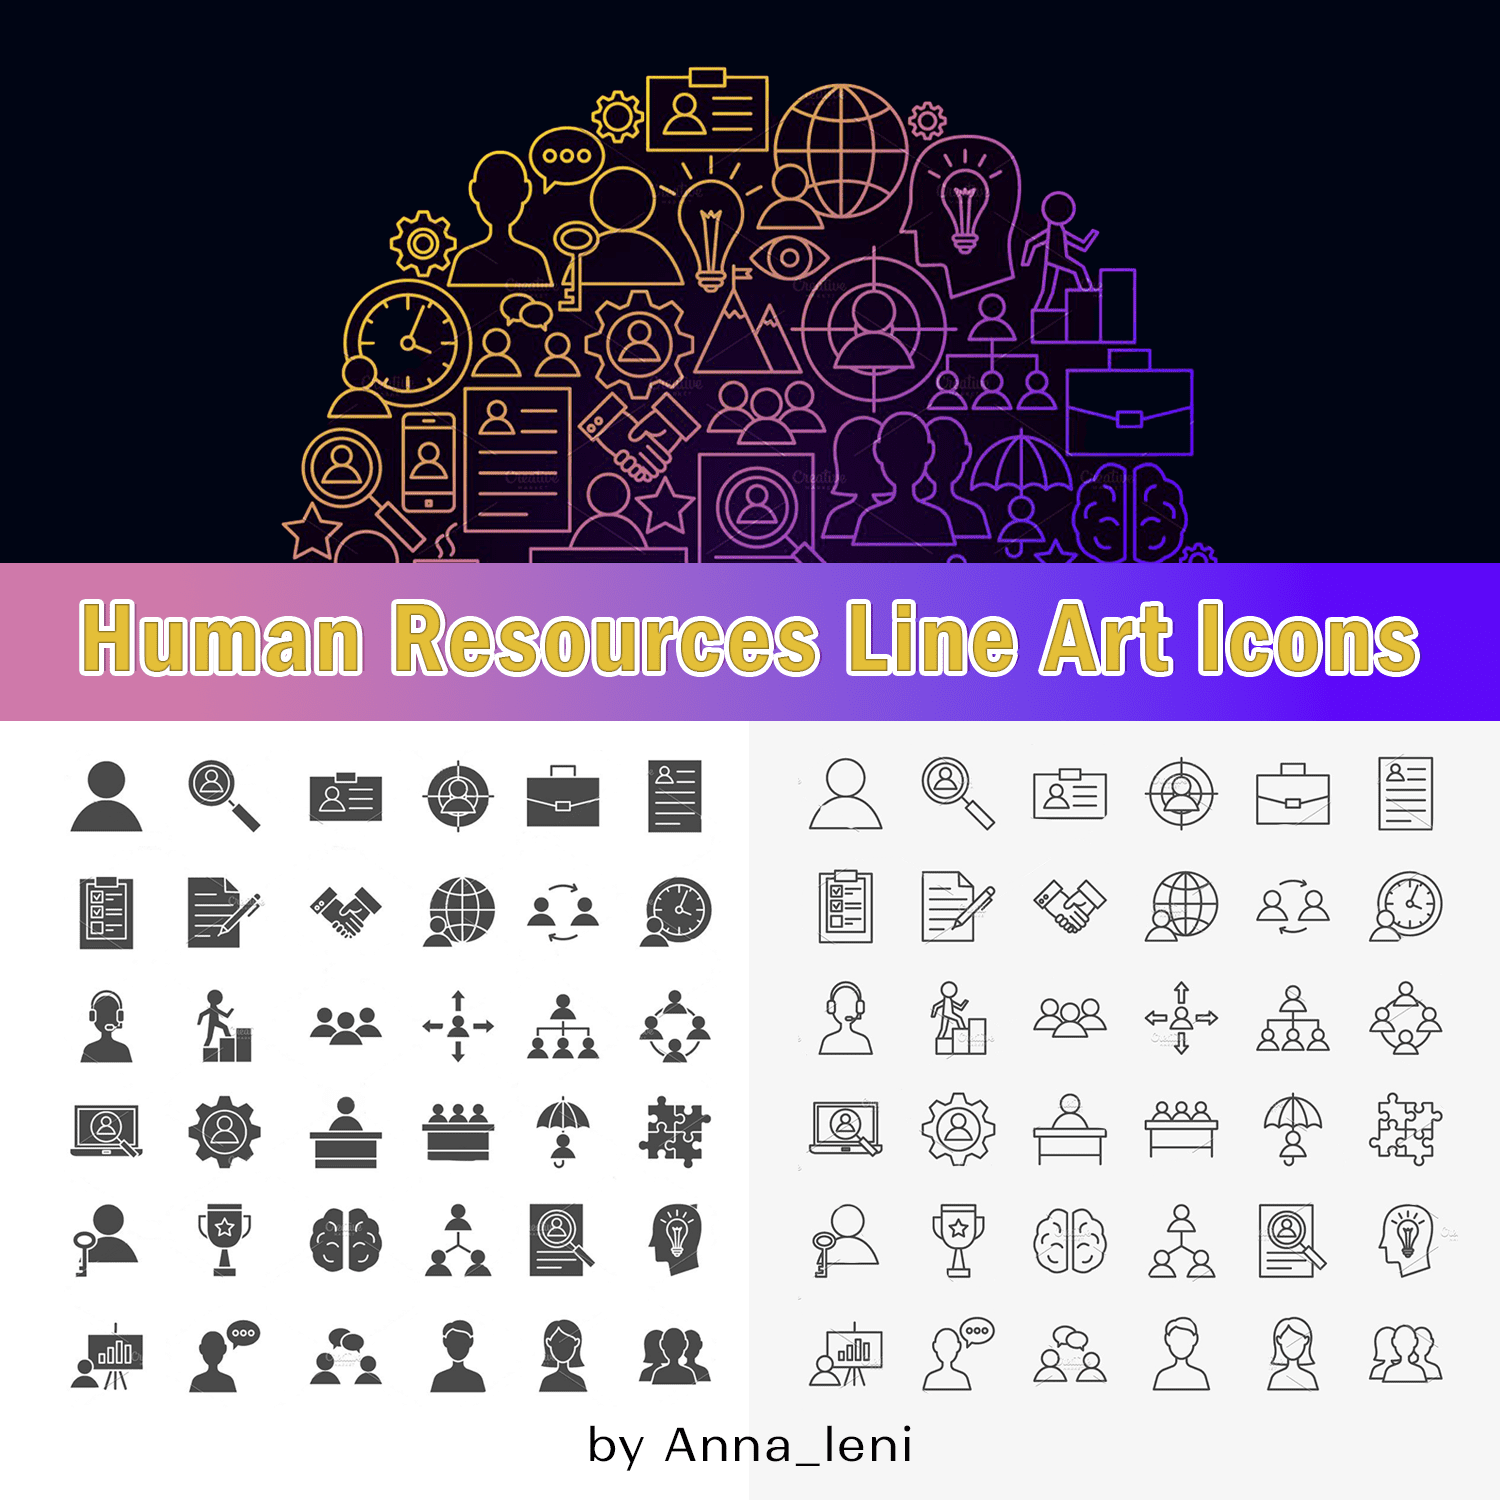 Human Resources Line Art Icons.